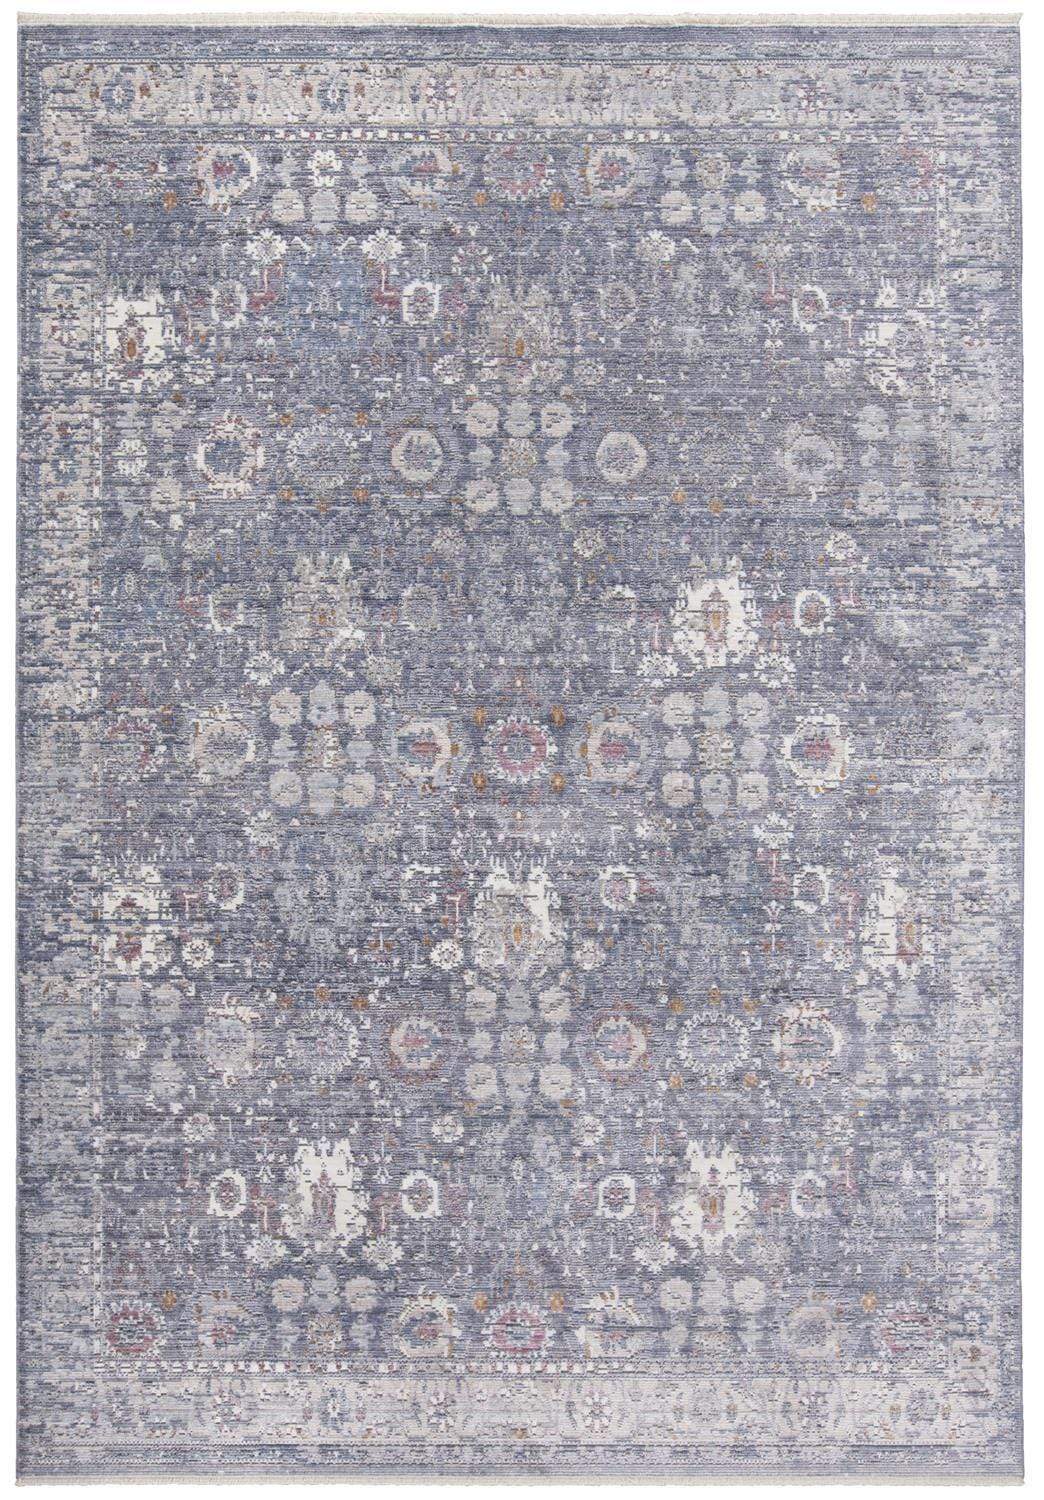 Feizy Feizy Cecily Luxury Distressed Ornamental Rug - Warm Blue Moonlight - Available in 7 Sizes 3' x 5' 8573587FMNL000B00